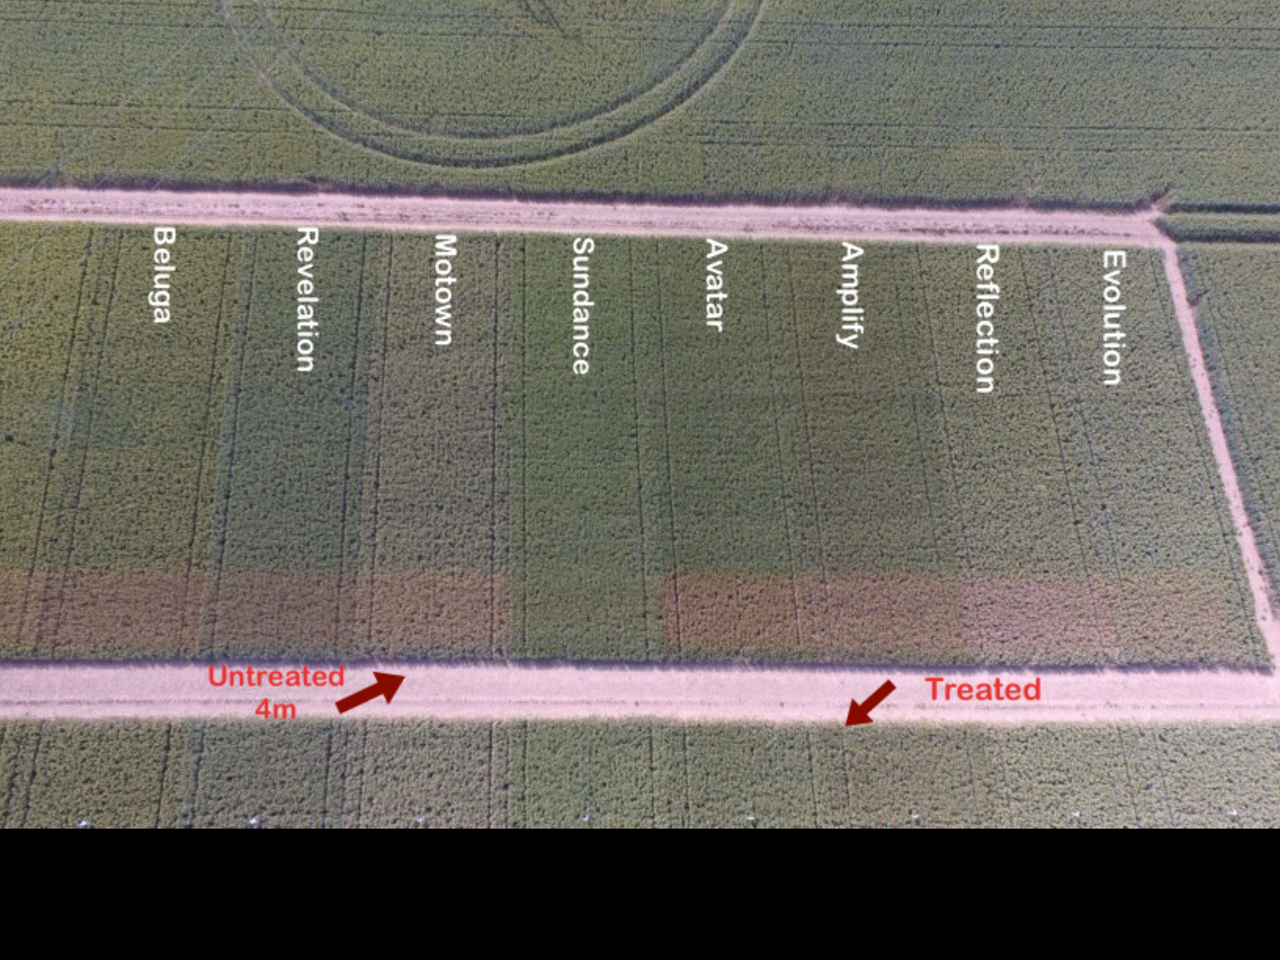 An aerial picture taken of variety trials